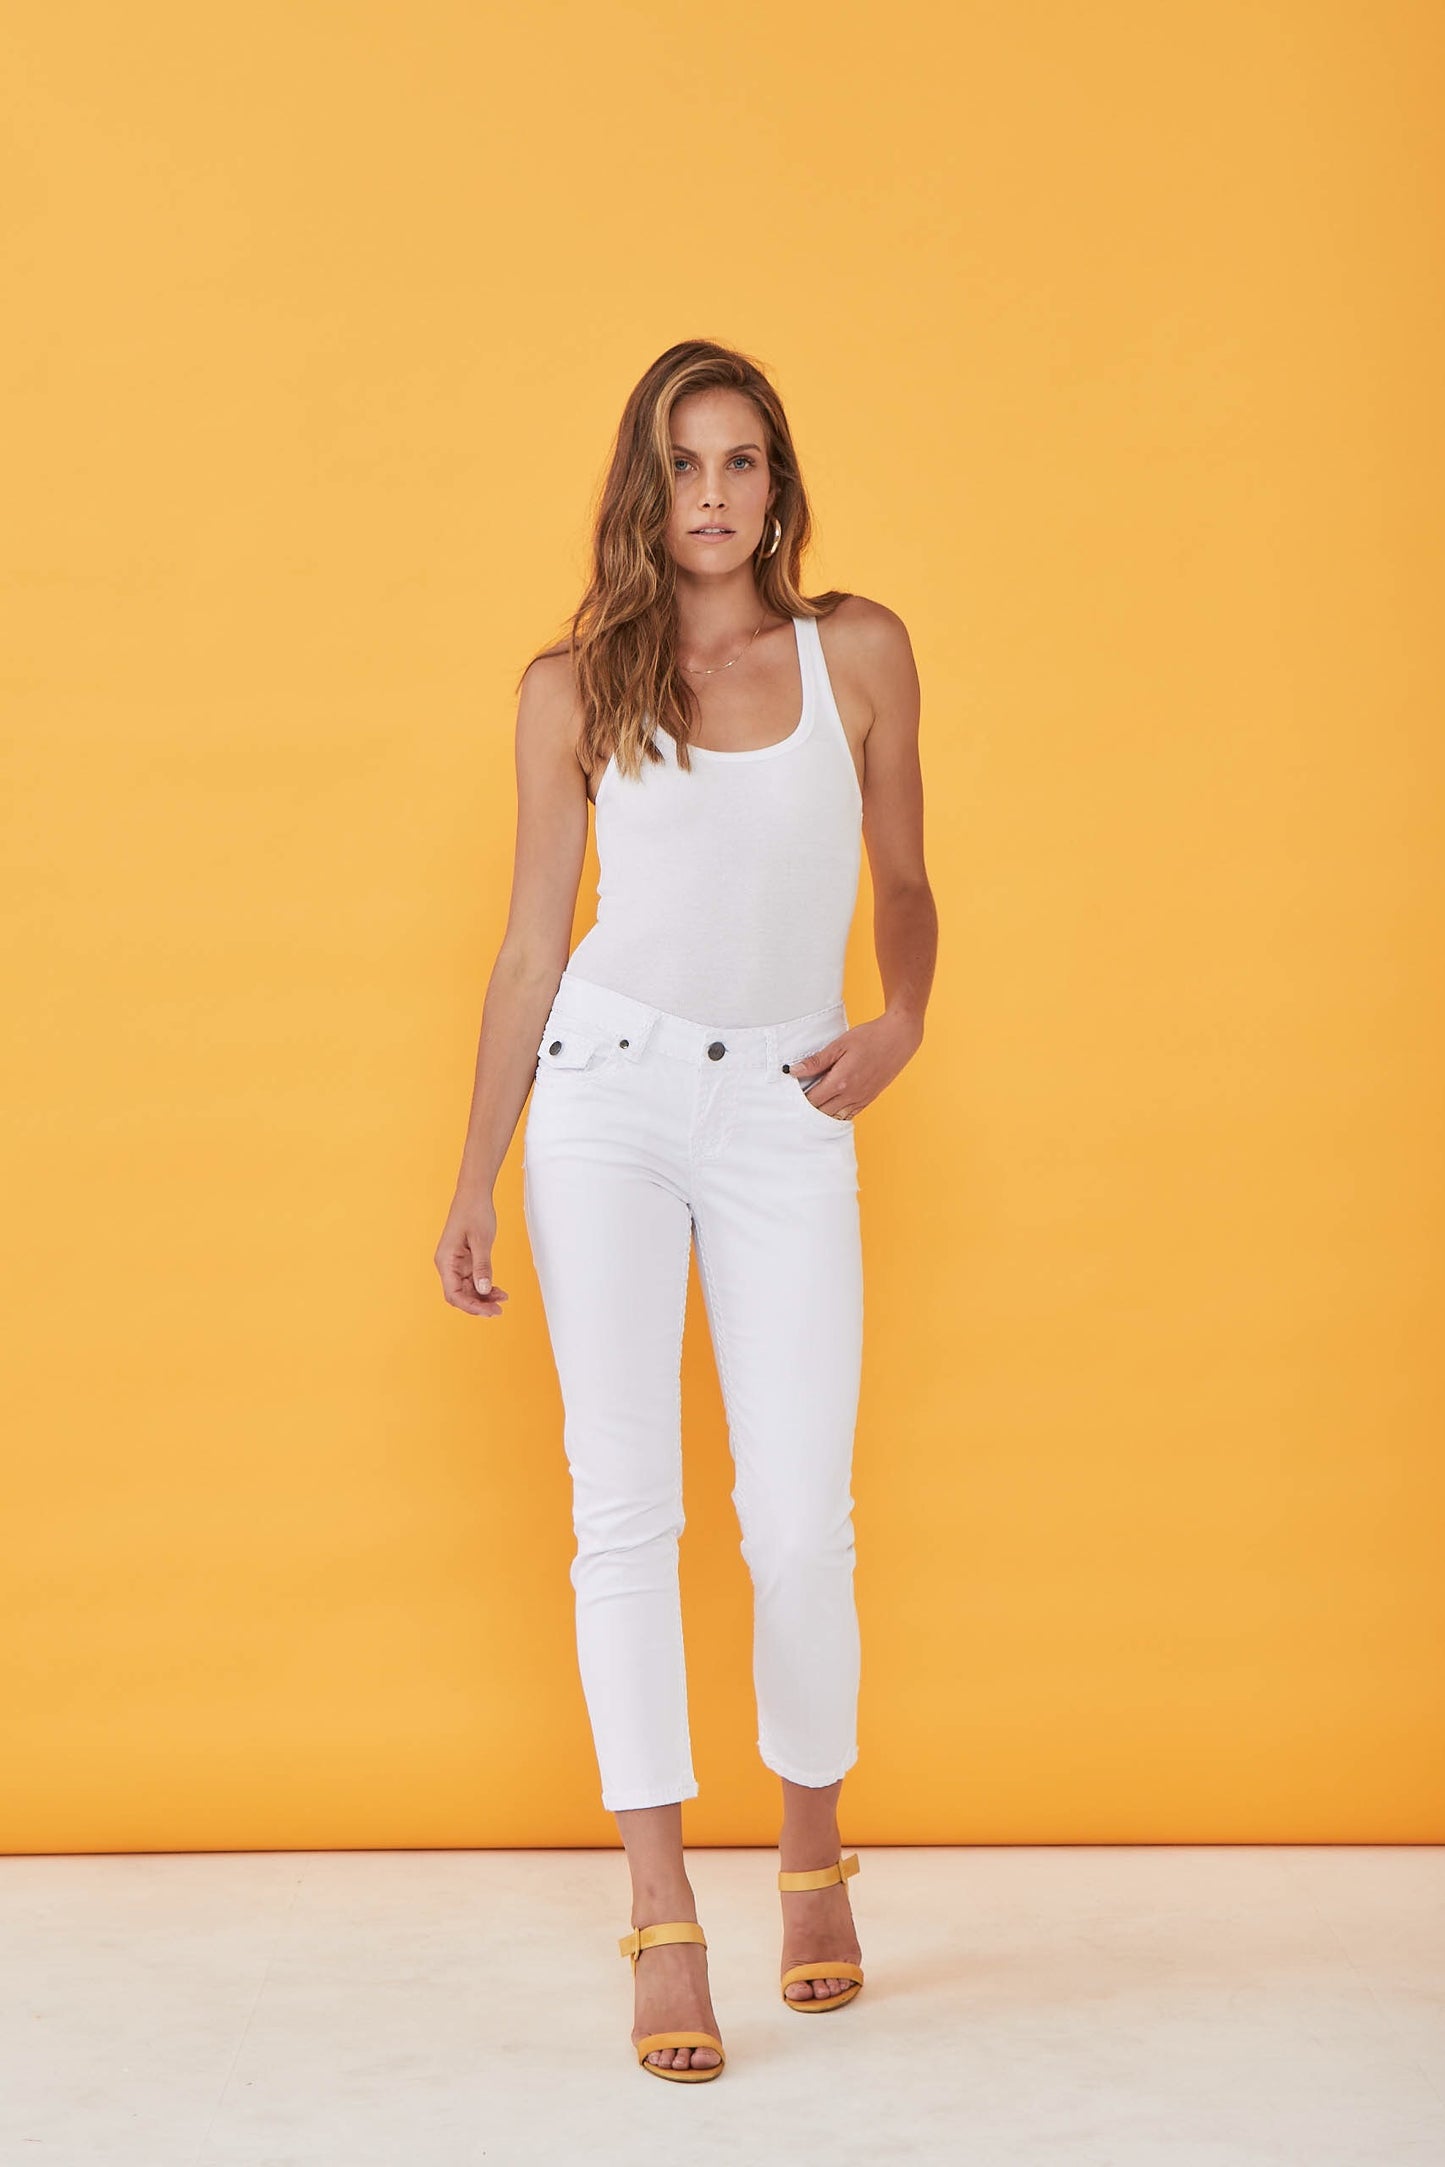 New London Jeans Chelsea White Cropped